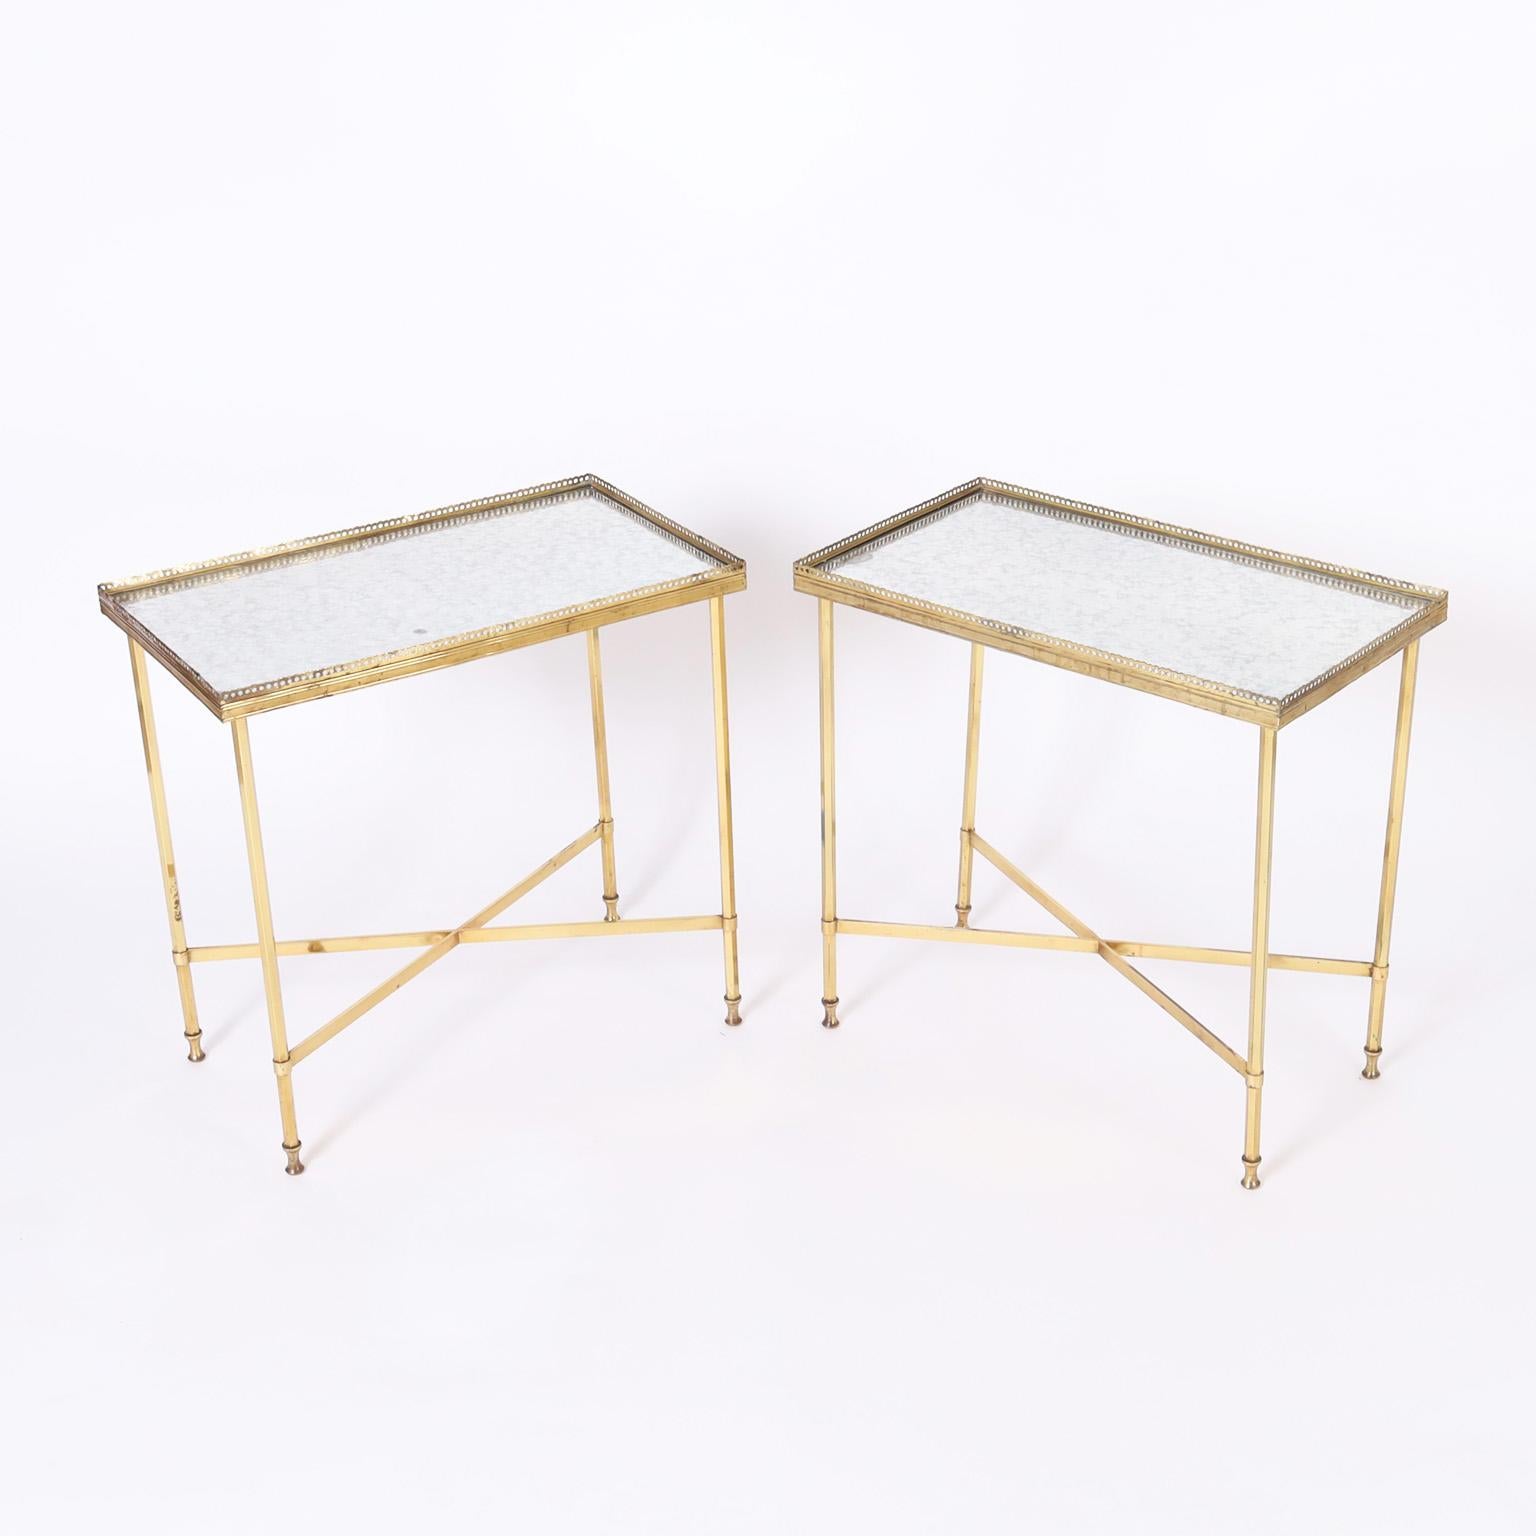 Chic pair of French stands with an unusual doré or gilt brass finish having distressed mirrored tops surrounded by perforated galleries. The bases have cross stretchers and elegant legs on hourglass feet.